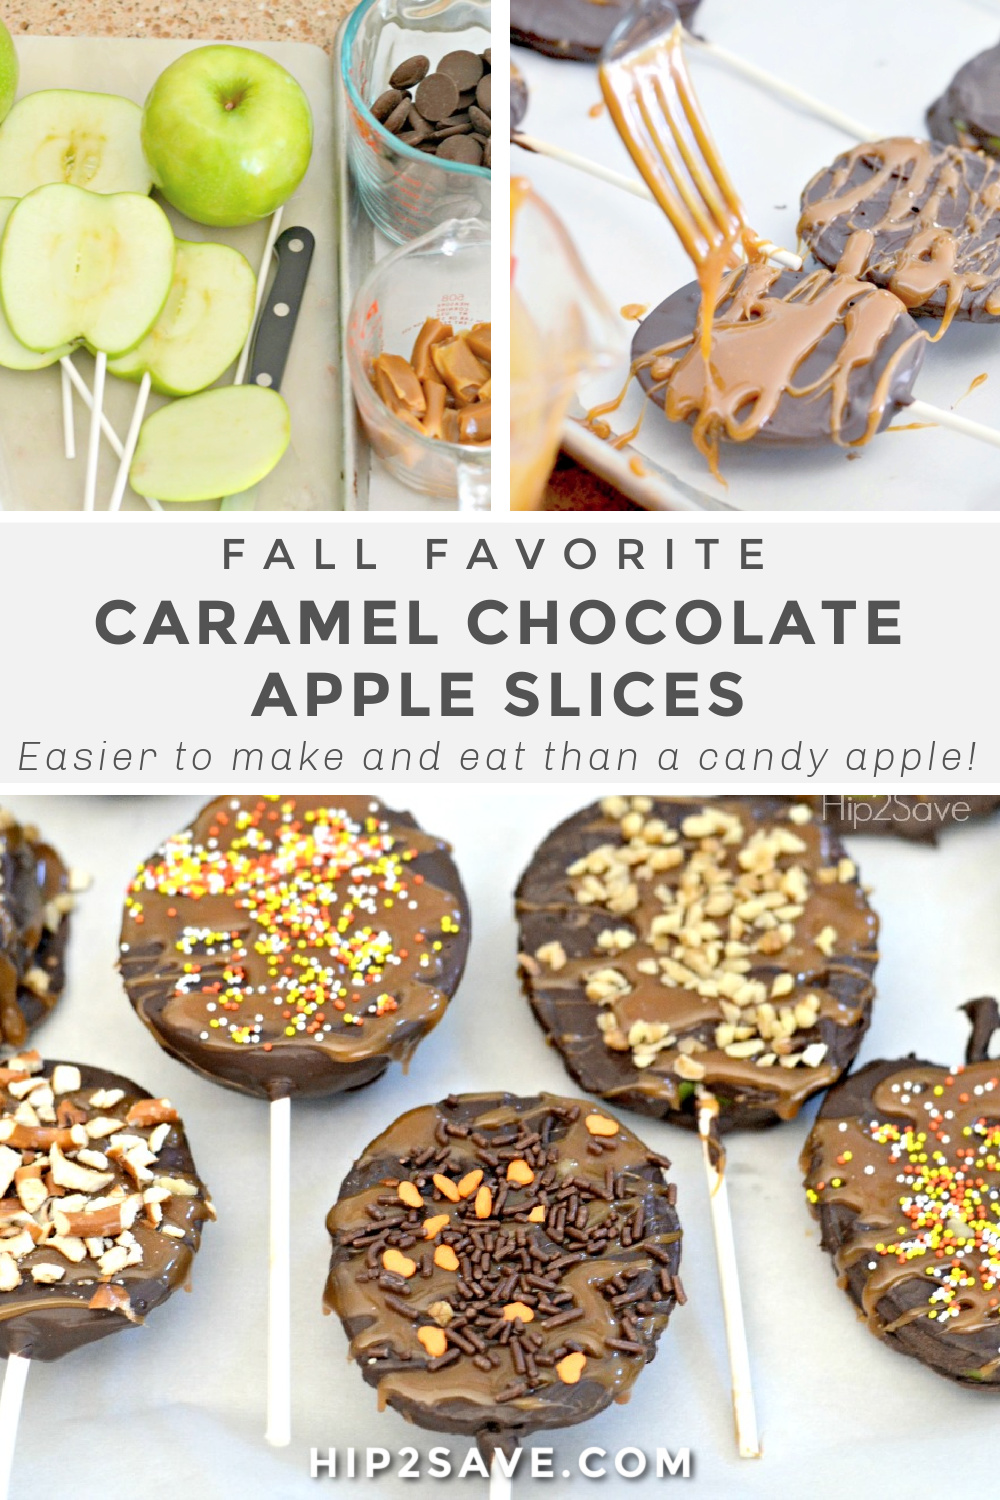 These Caramel Chocolate Apple Slices are So Easy to Eat!